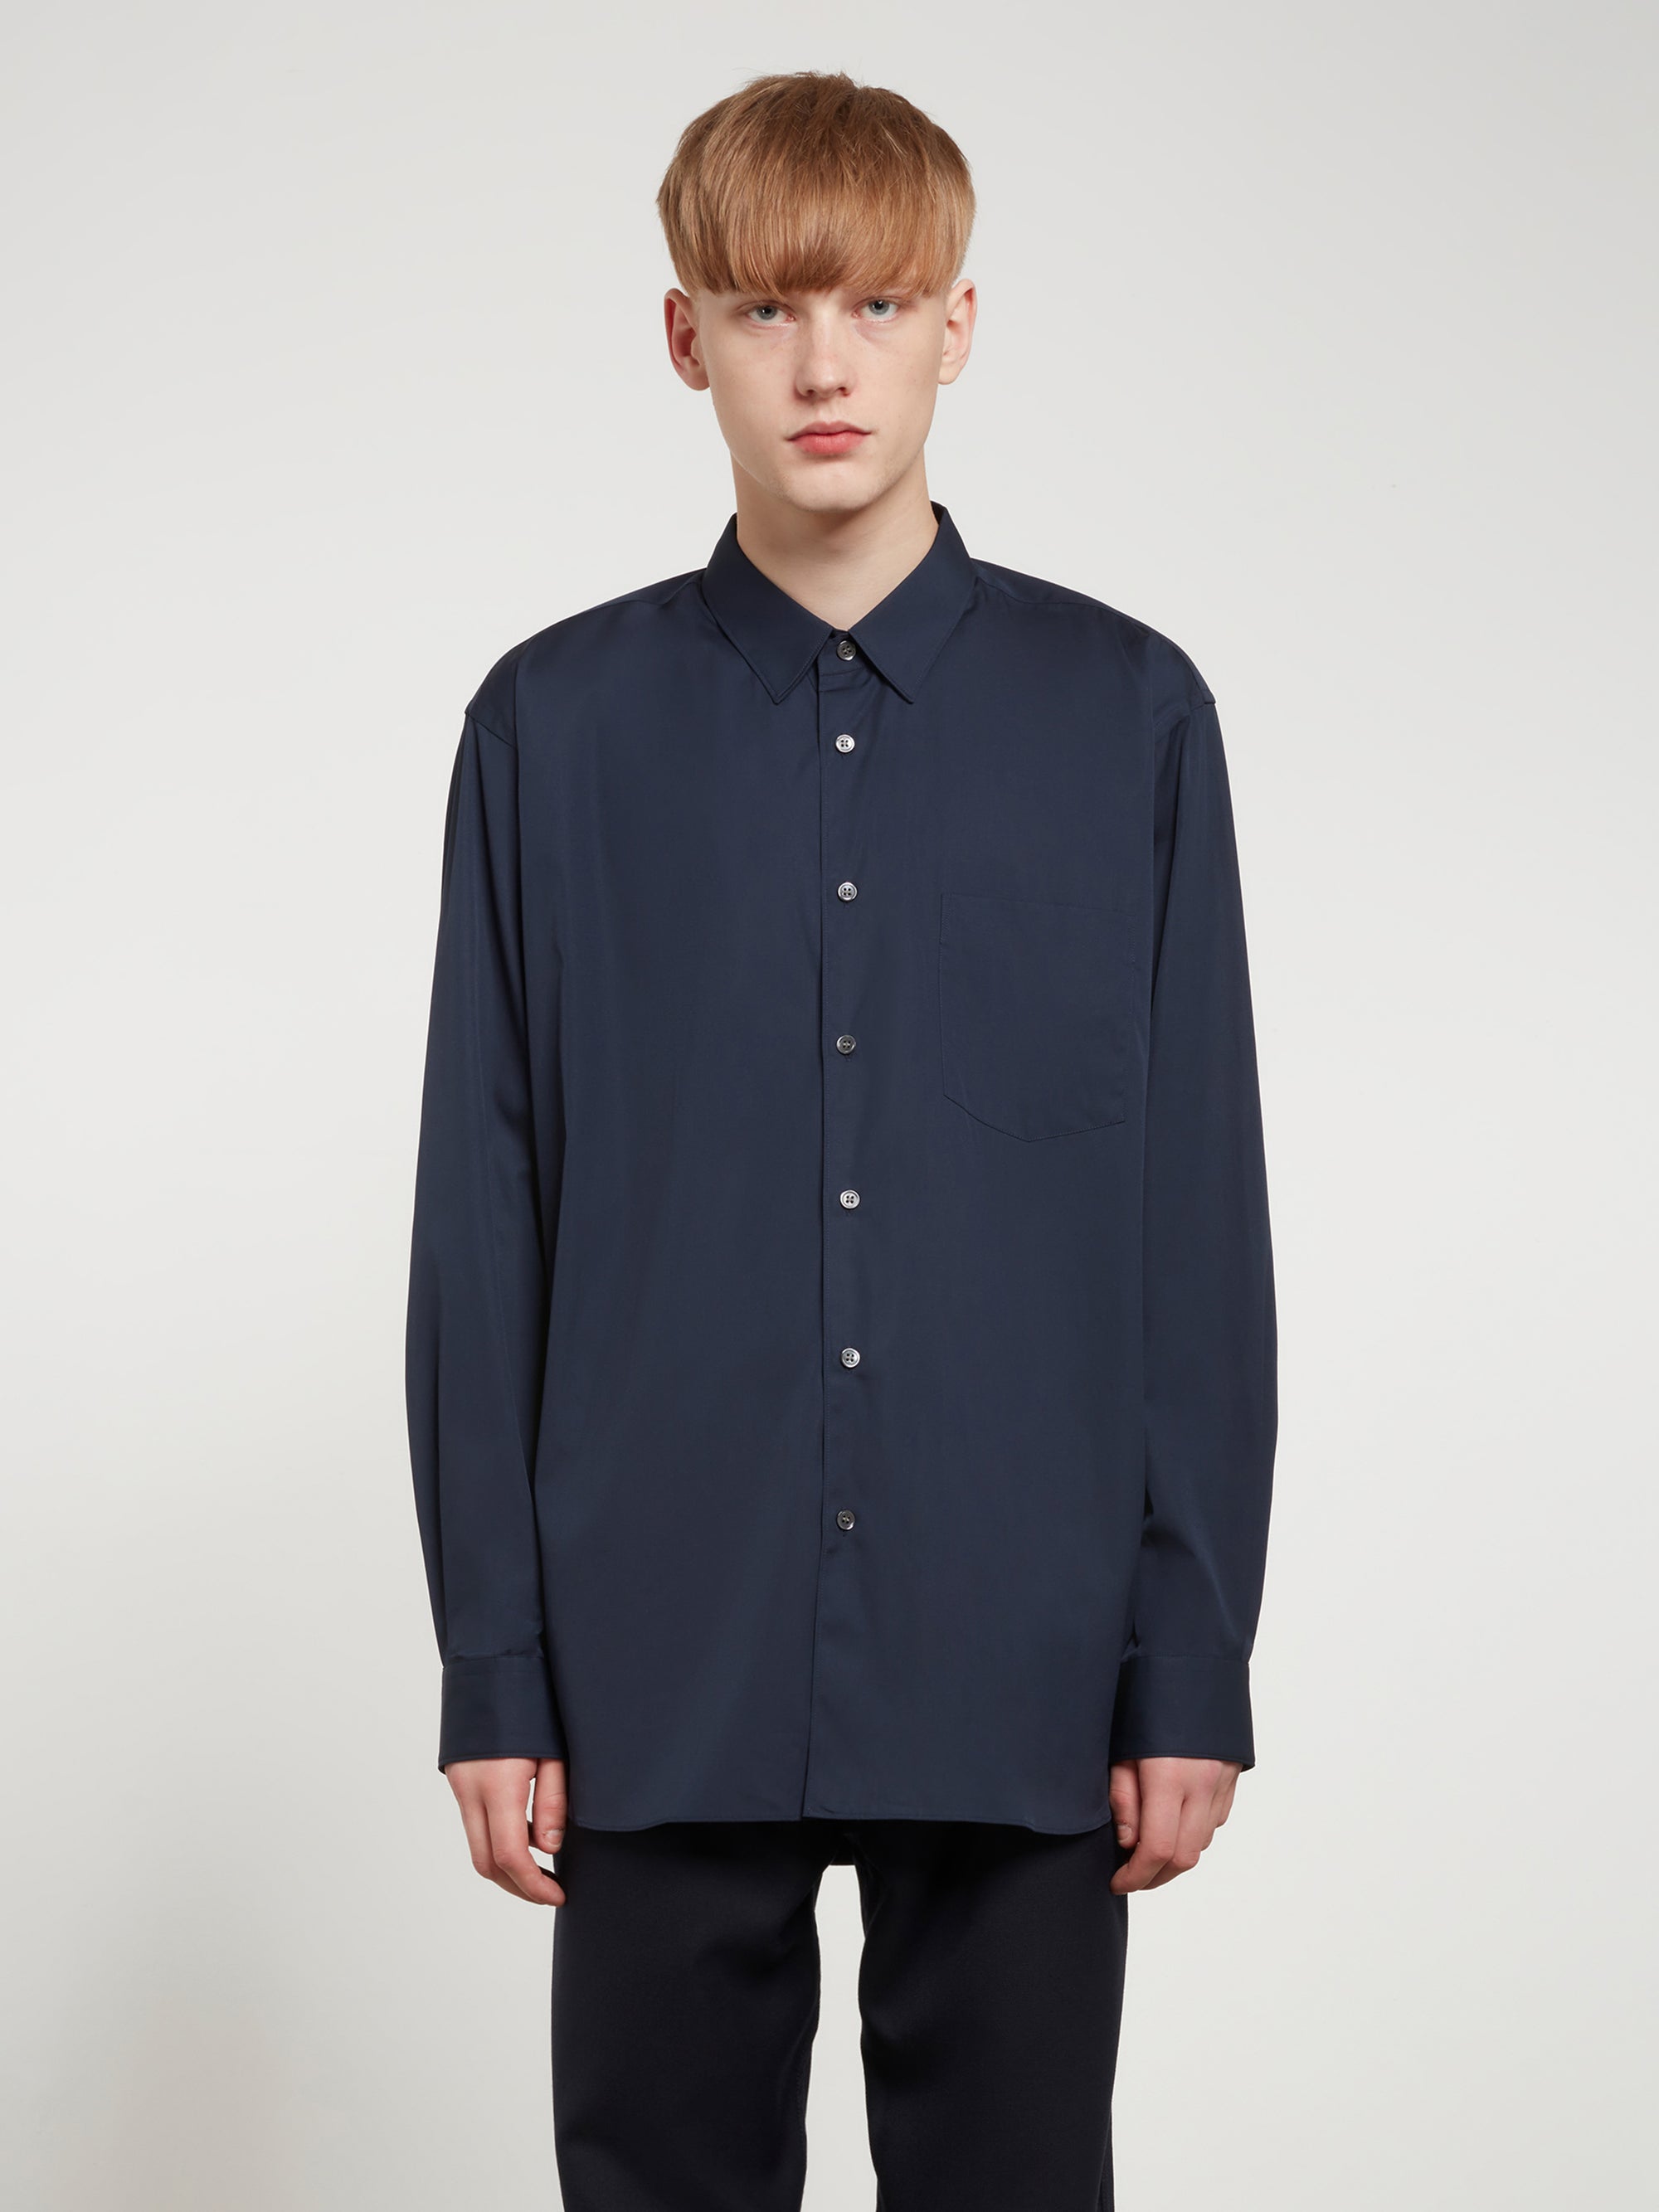 CDG Shirt Forever - Wide Fit Cotton Shirt - (Navy) view 2